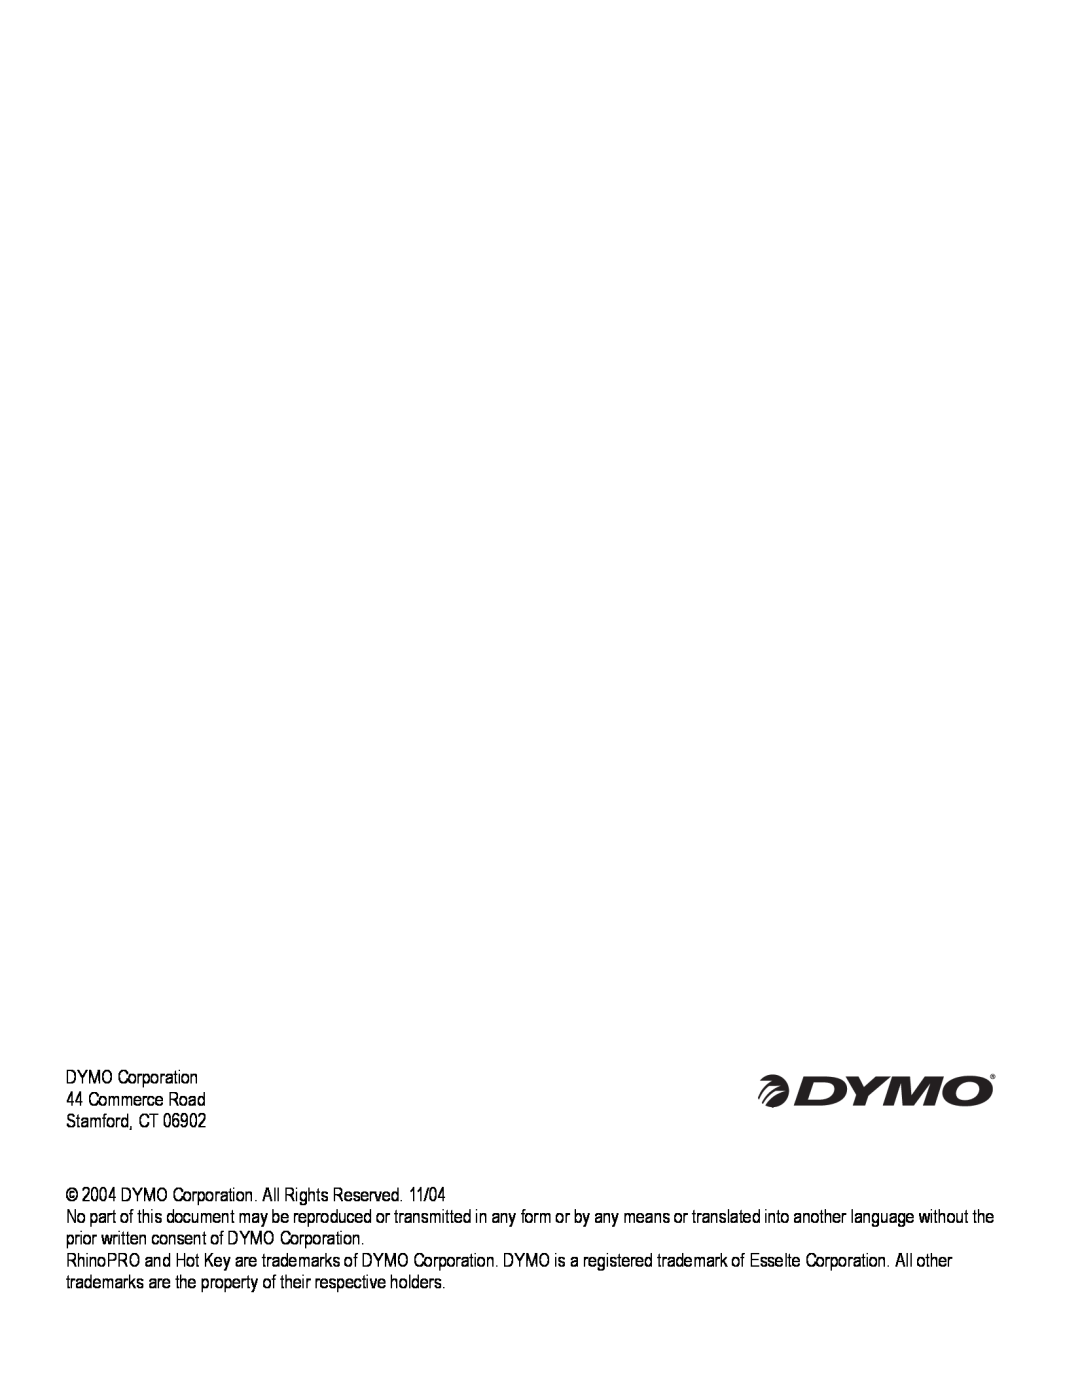 Dymo 3000 instruction manual DYMO Corporation 44 Commerce Road Stamford, CT, DYMO Corporation. All Rights Reserved. 11/04 